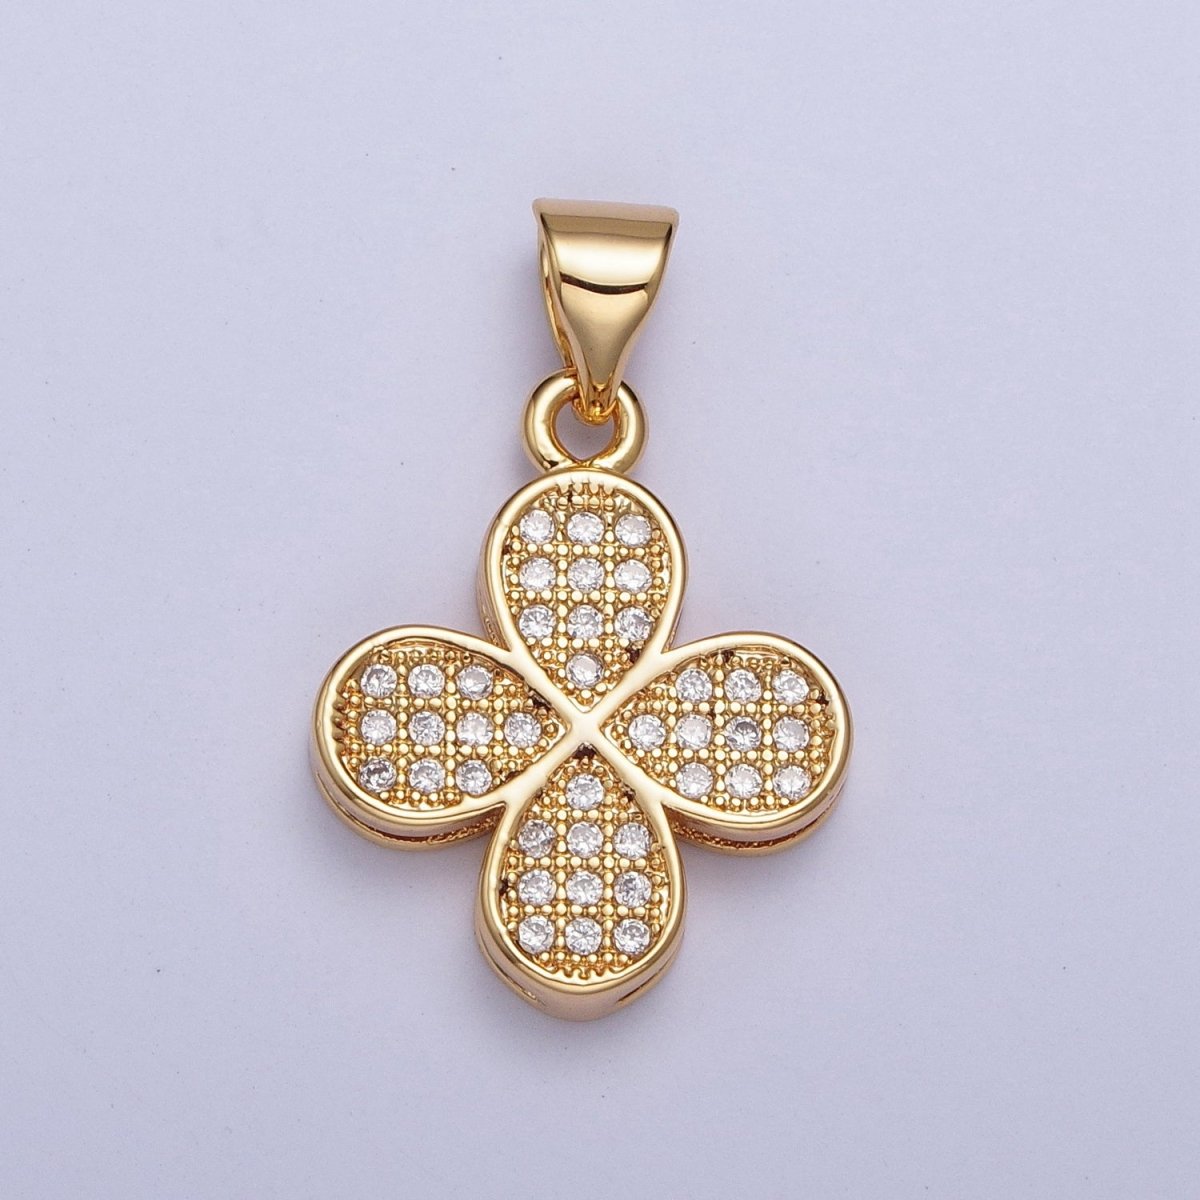 24K Gold Filled Micro Pave Leaf Four Leaf Clover Plant Pendant For Jewelry Making X-444 - DLUXCA